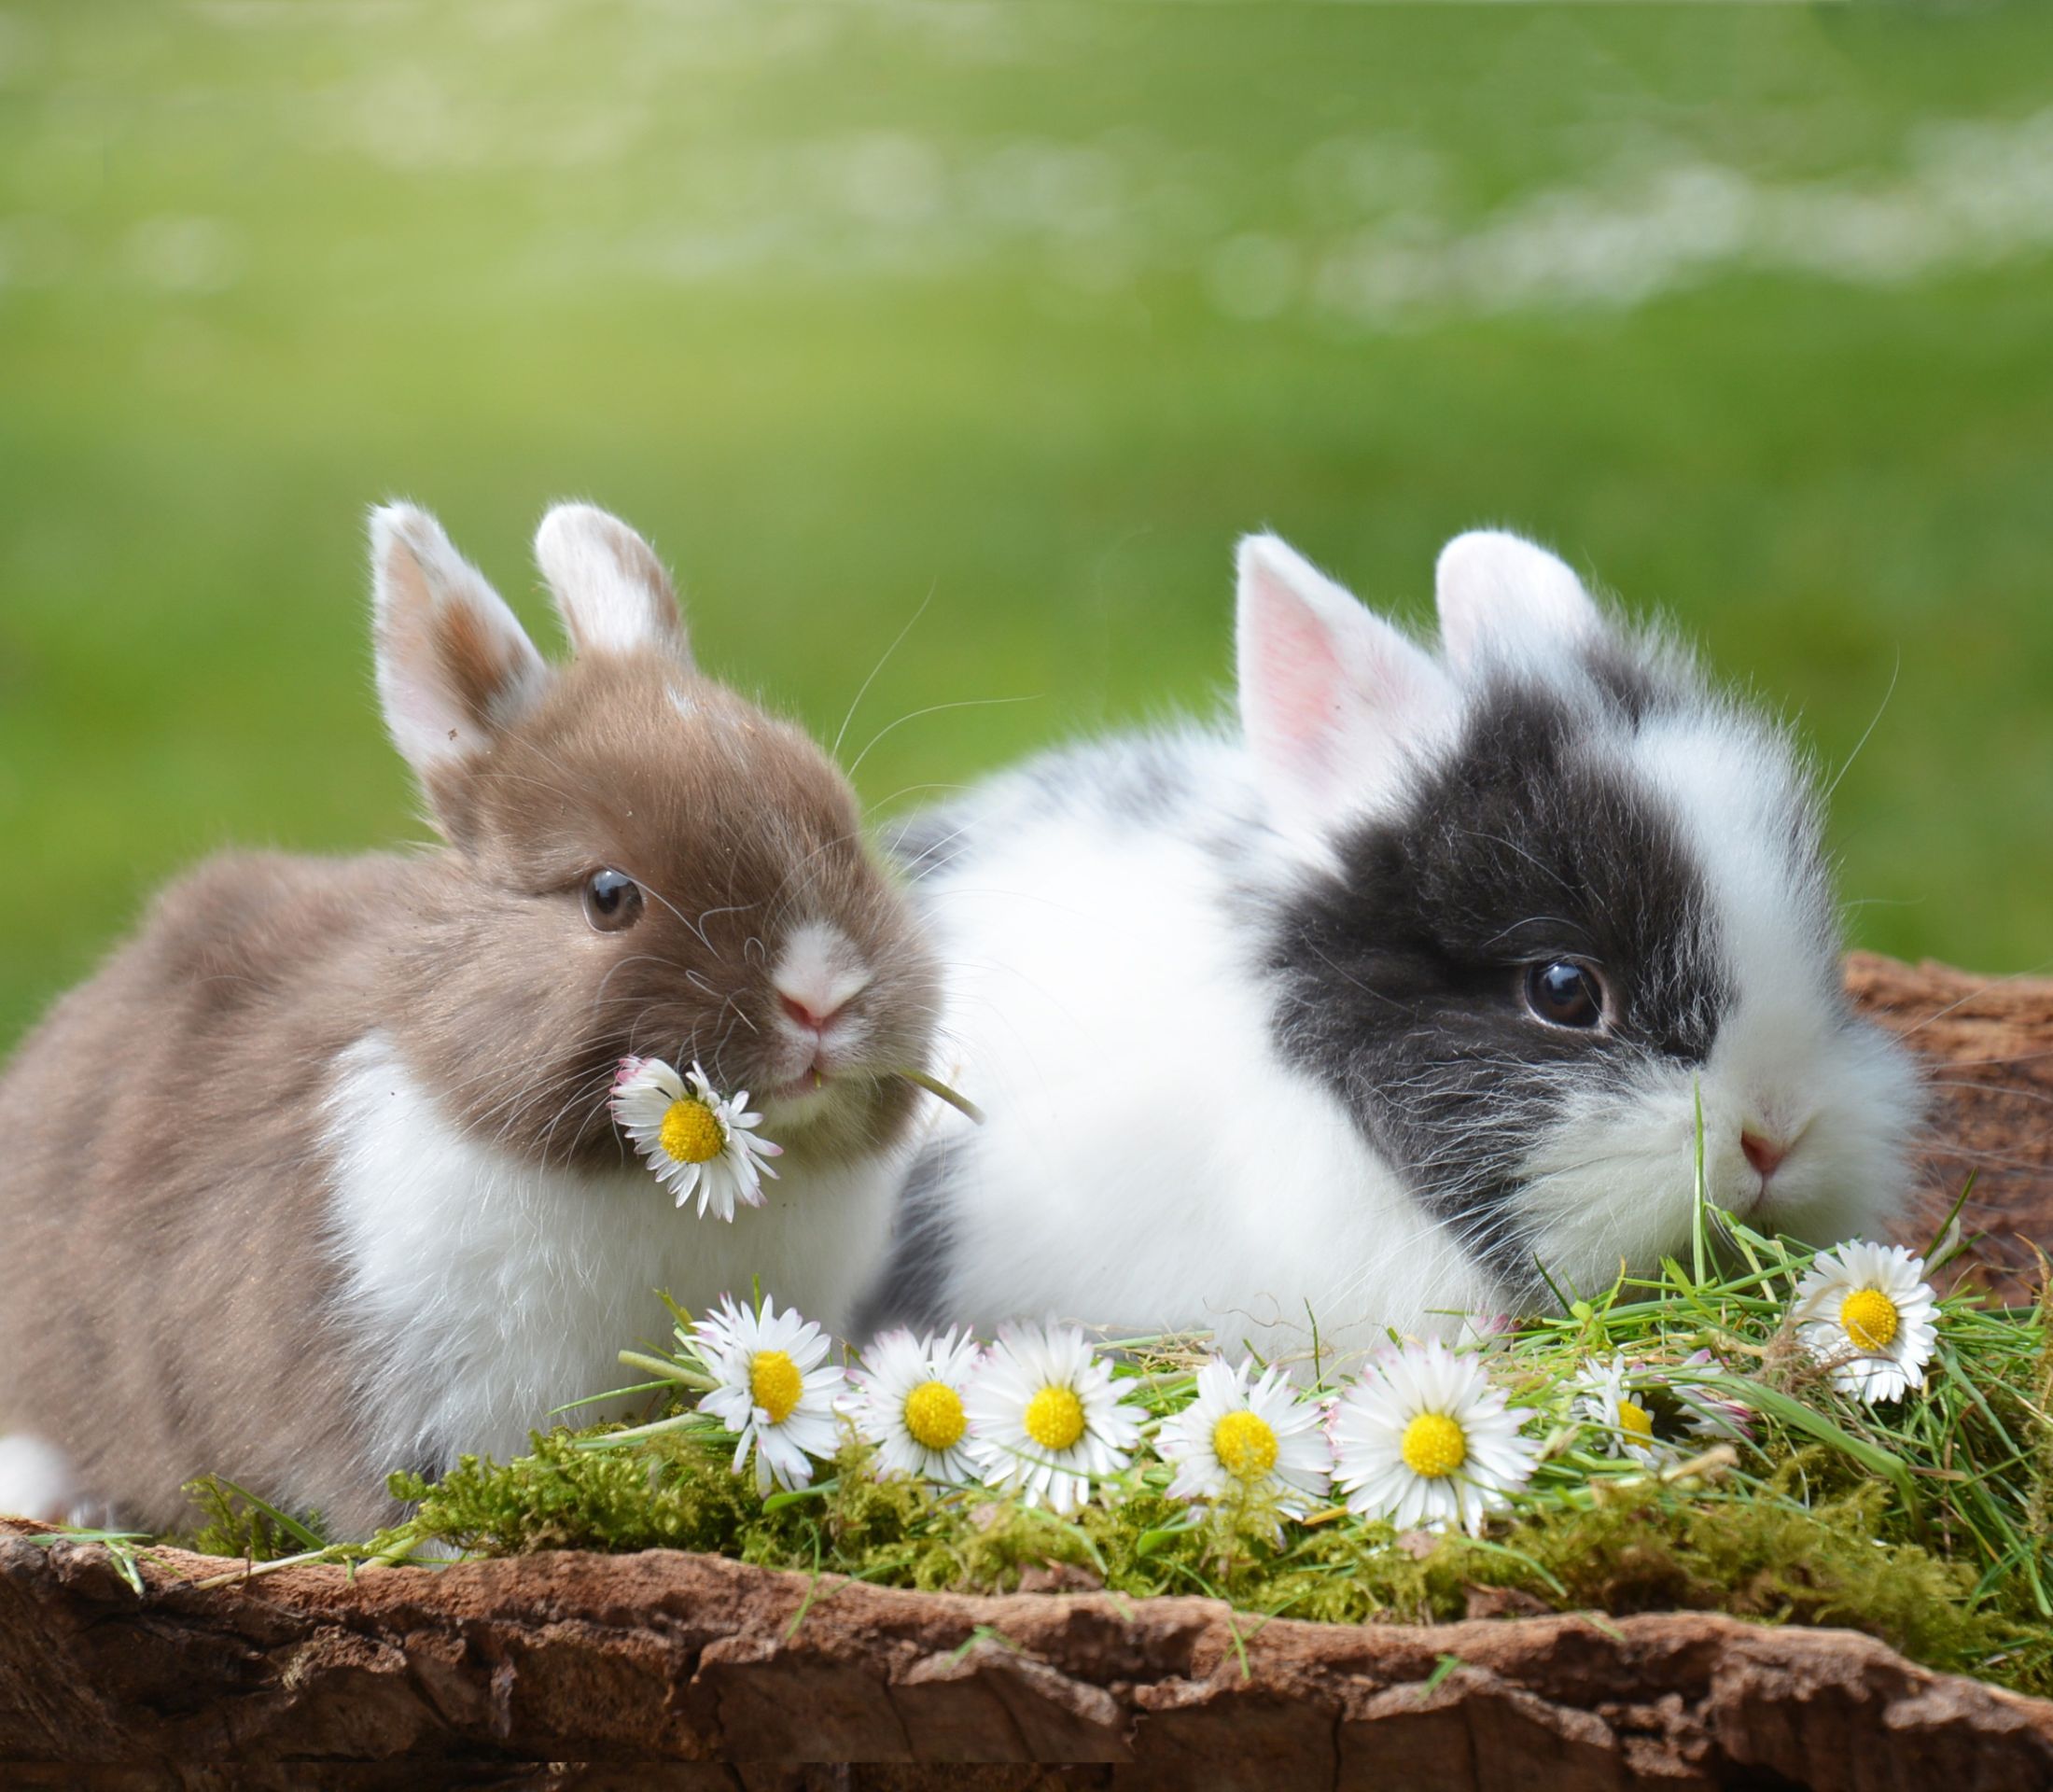 Two bunnies with small white flowers